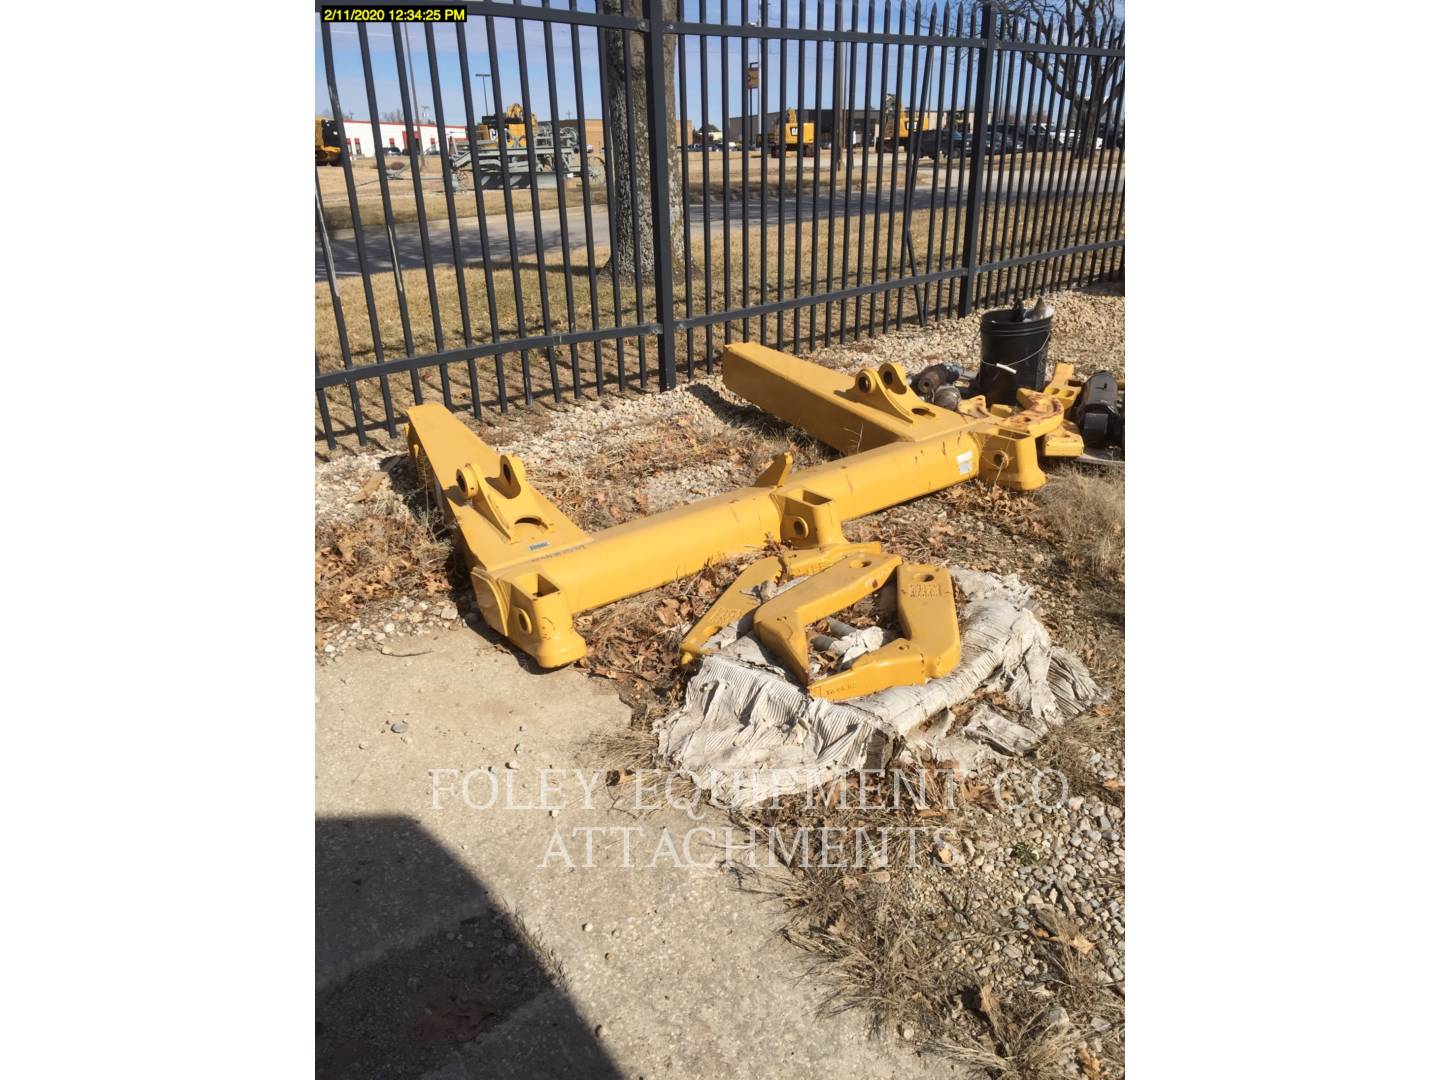 Used Equipment Attachments For Sale - Foley Equipment Mobile